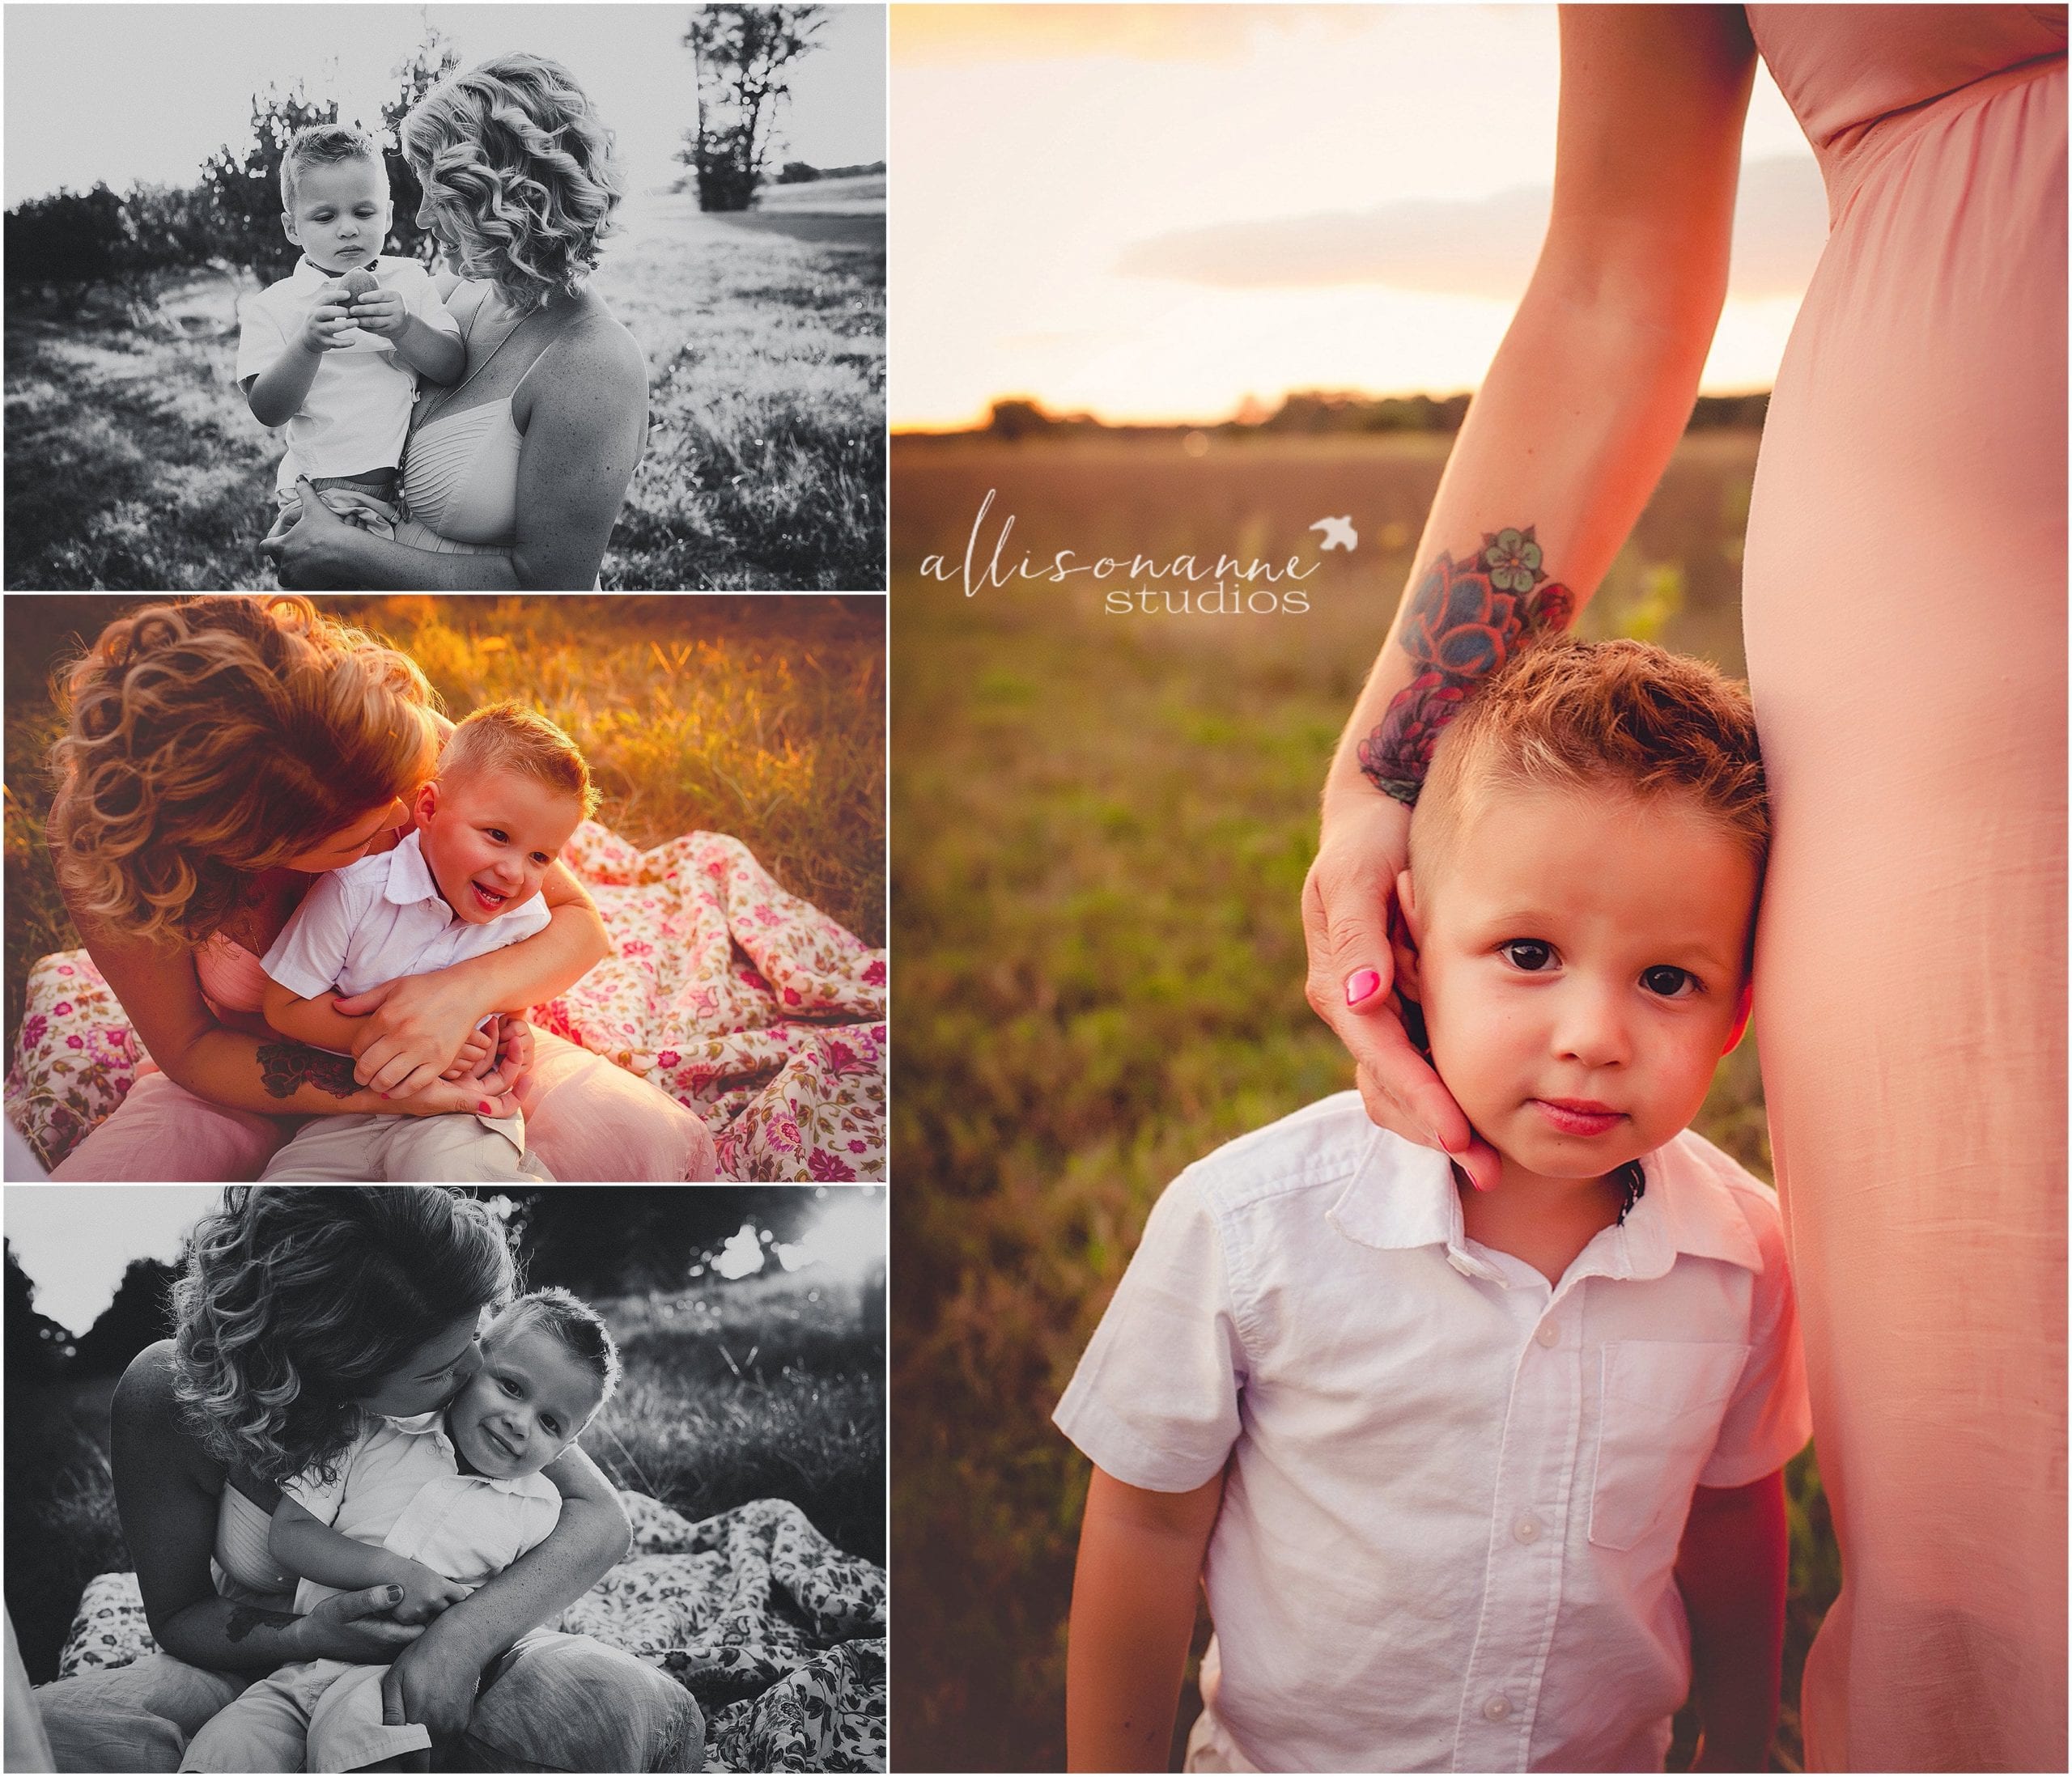 Twins, Pastore Orchards, Peach Fields, Hair Cuttery, lifestyle Sessions, AllisonAnne Studios, Hammonton, sunset, dusk, word of mouth, best family photographer